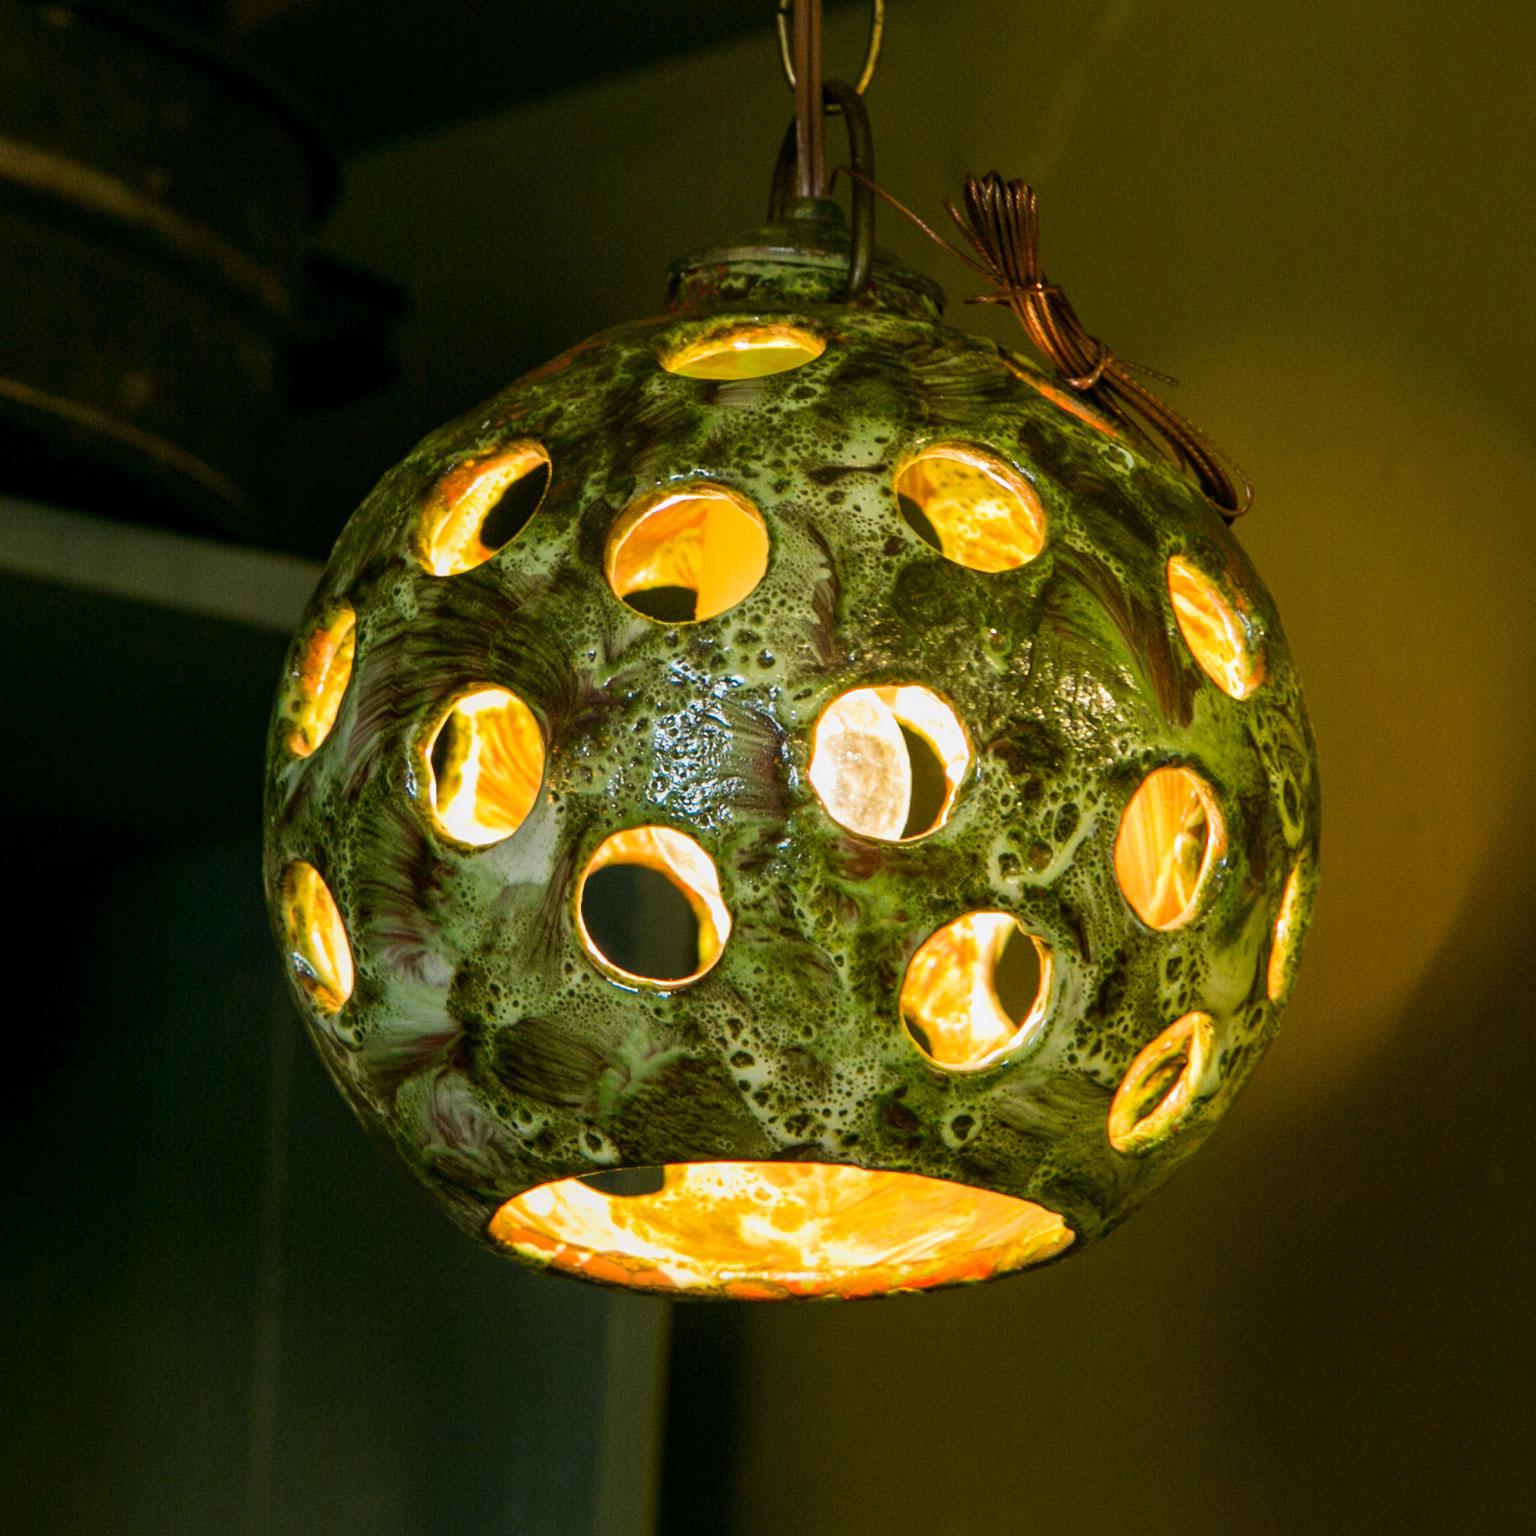 Mid-century stoneware pendant light from Germany. Ceramic surface is a nice textured multi-hue green. The pierced circles create wonderful shadows and movement upon the wall. This one-of-a-kind light evokes an Arts and Crafts or Bohemian feel. Newly